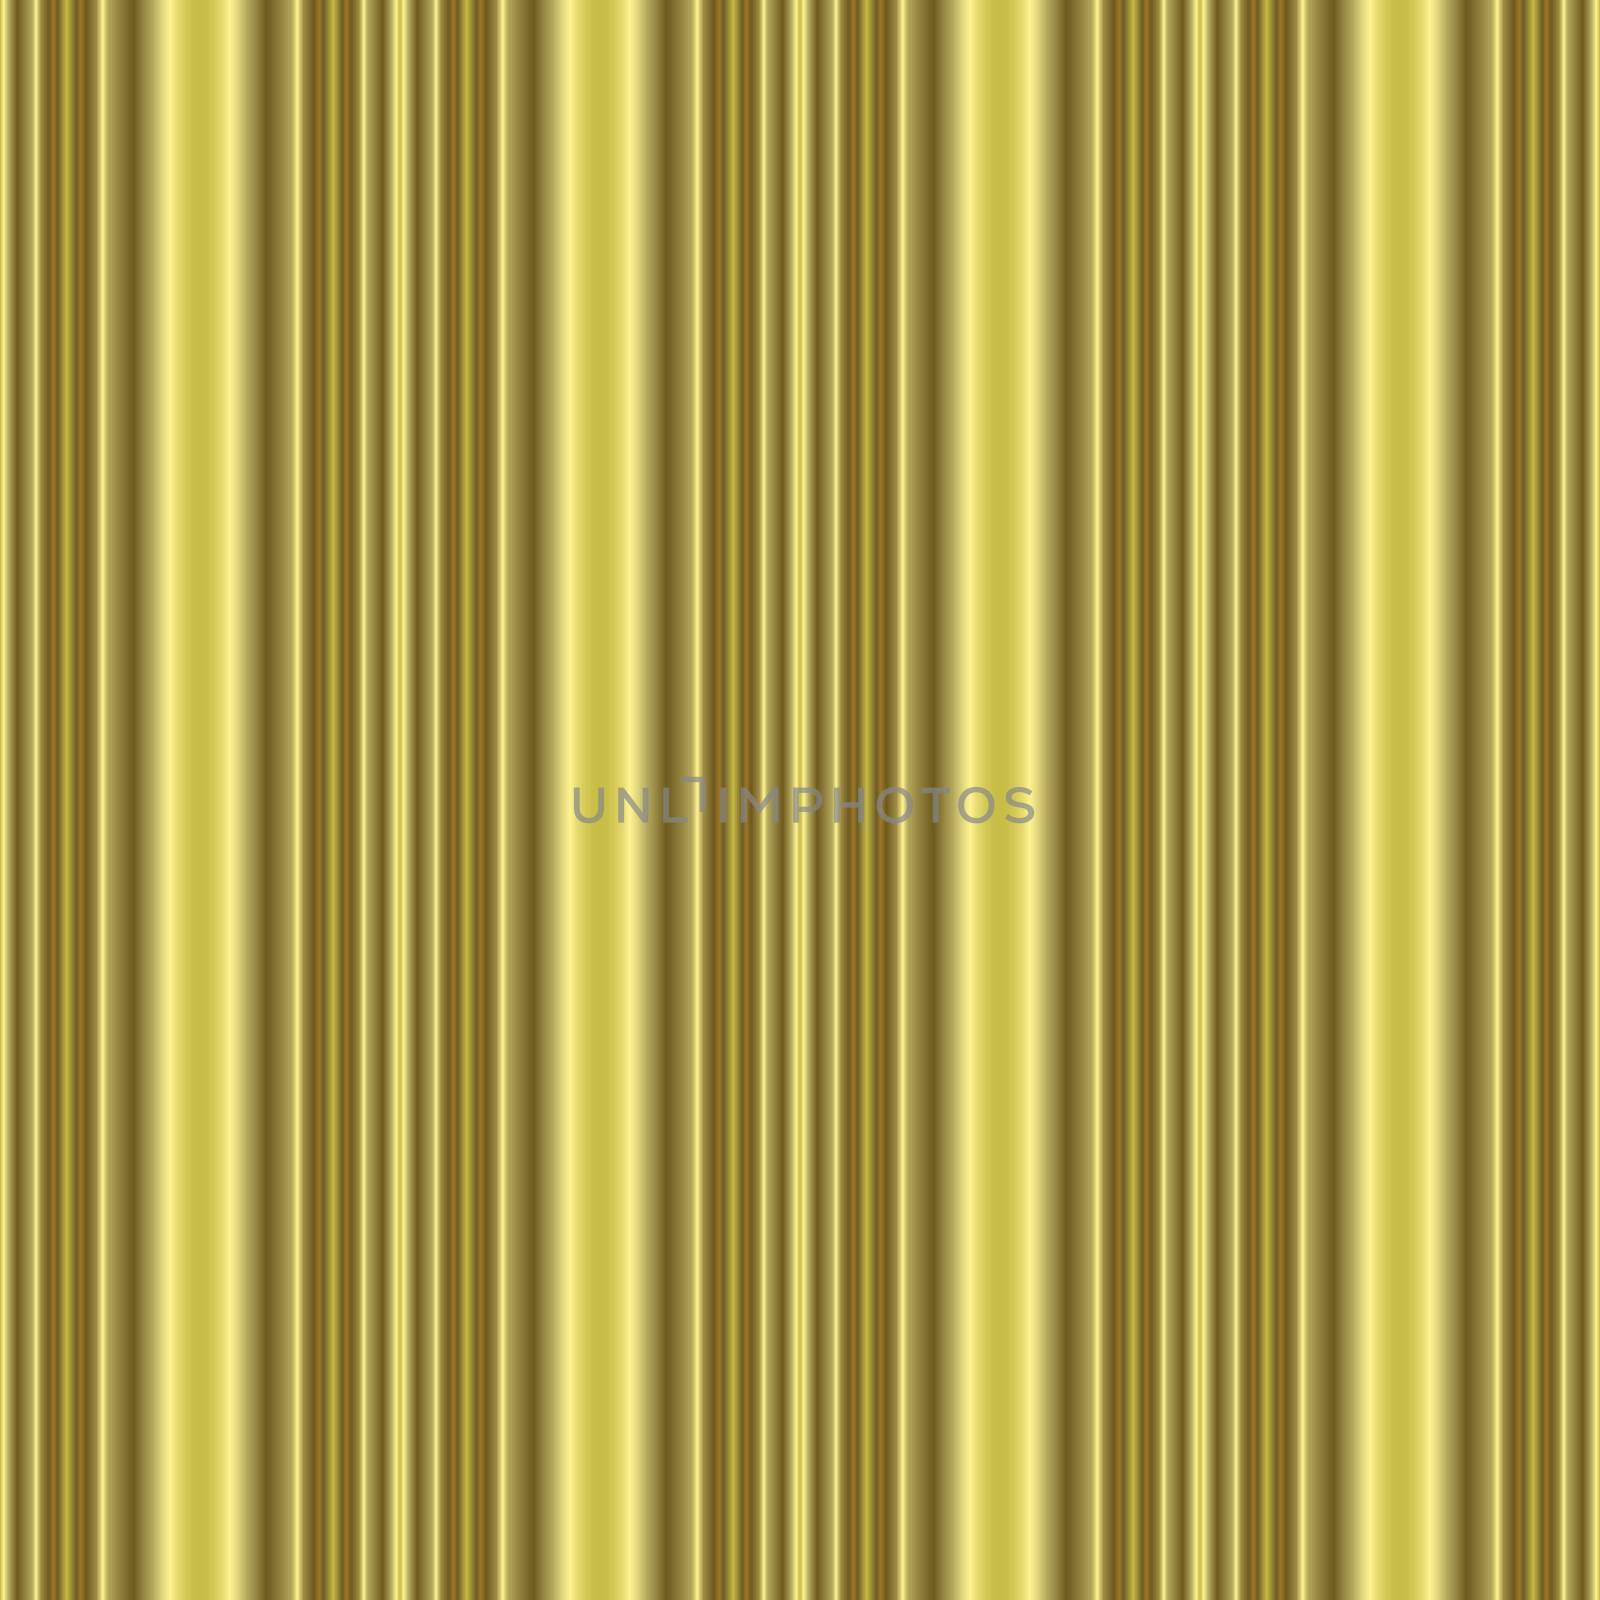 seamless tilable background texture with stripes